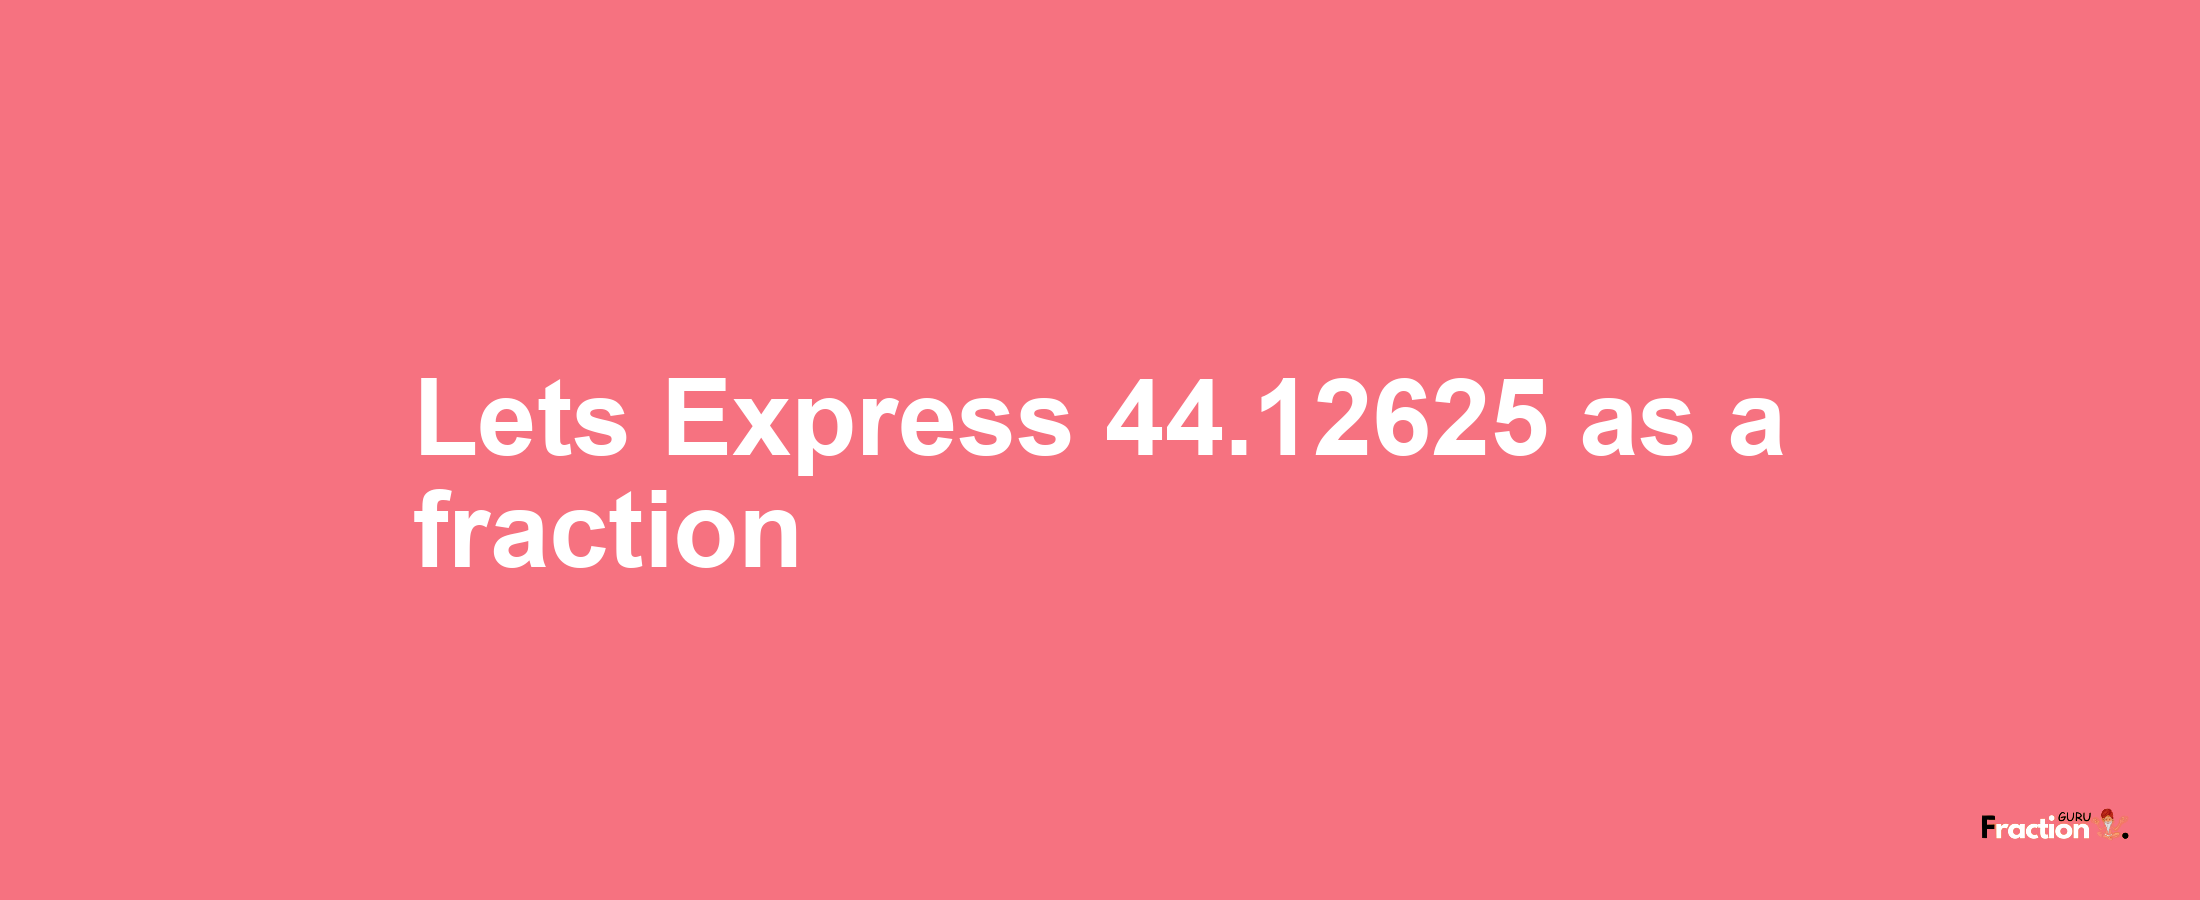 Lets Express 44.12625 as afraction